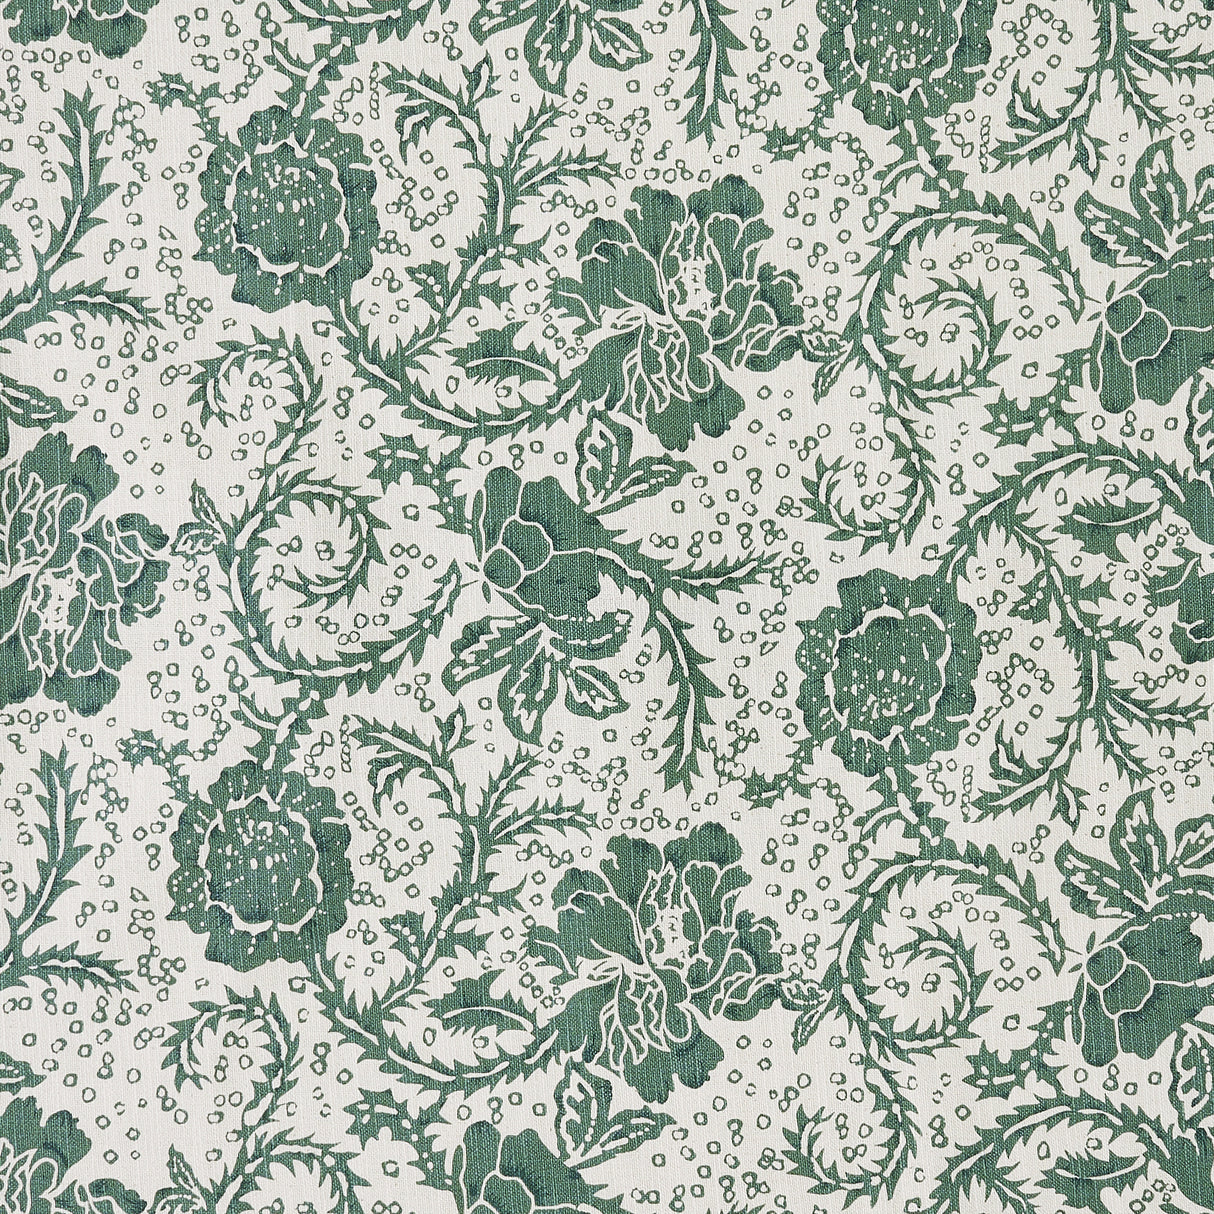 81216-Dorset-Green-Floral-Twin-Bed-Skirt-39x76x16-image-4